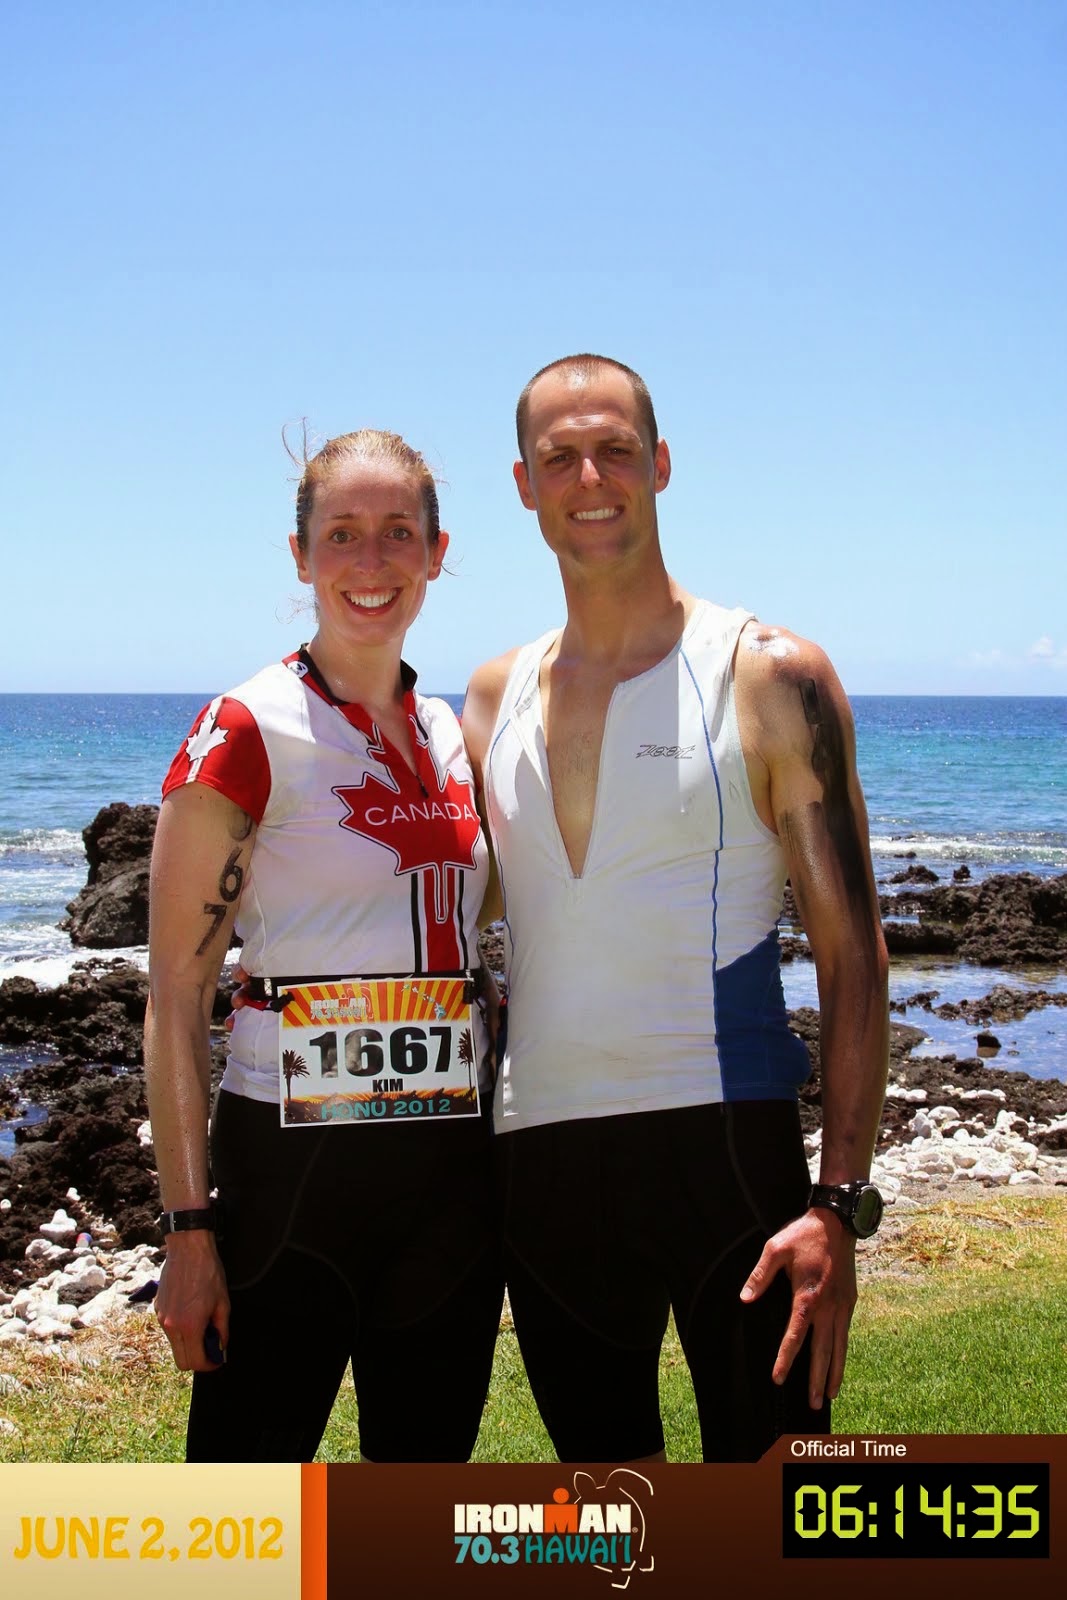 Then we did a HALF IRONMAN in HAWAII as redemption.